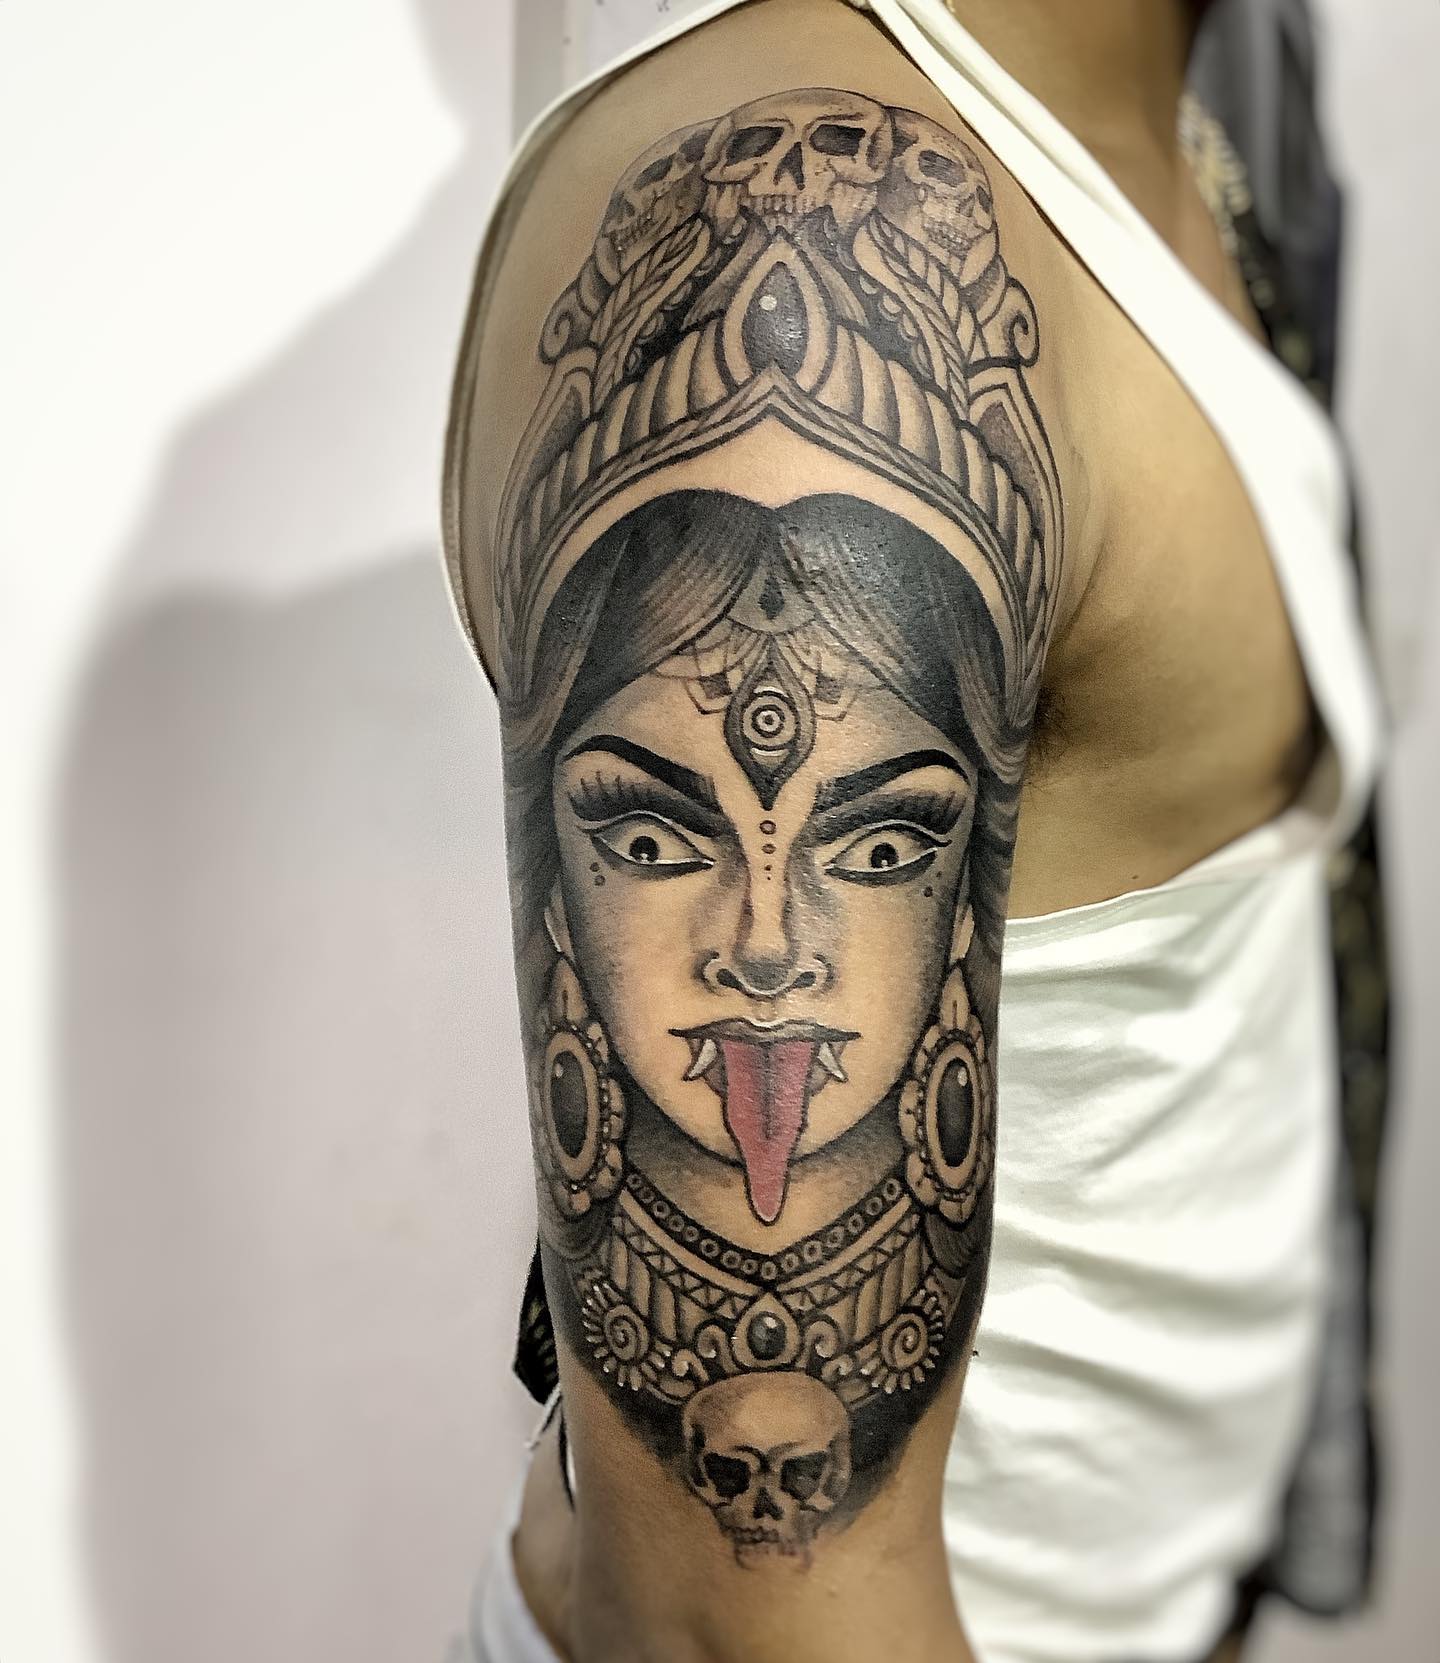 101 Best Kali Tattoo Ideas You Have To See To Believe!